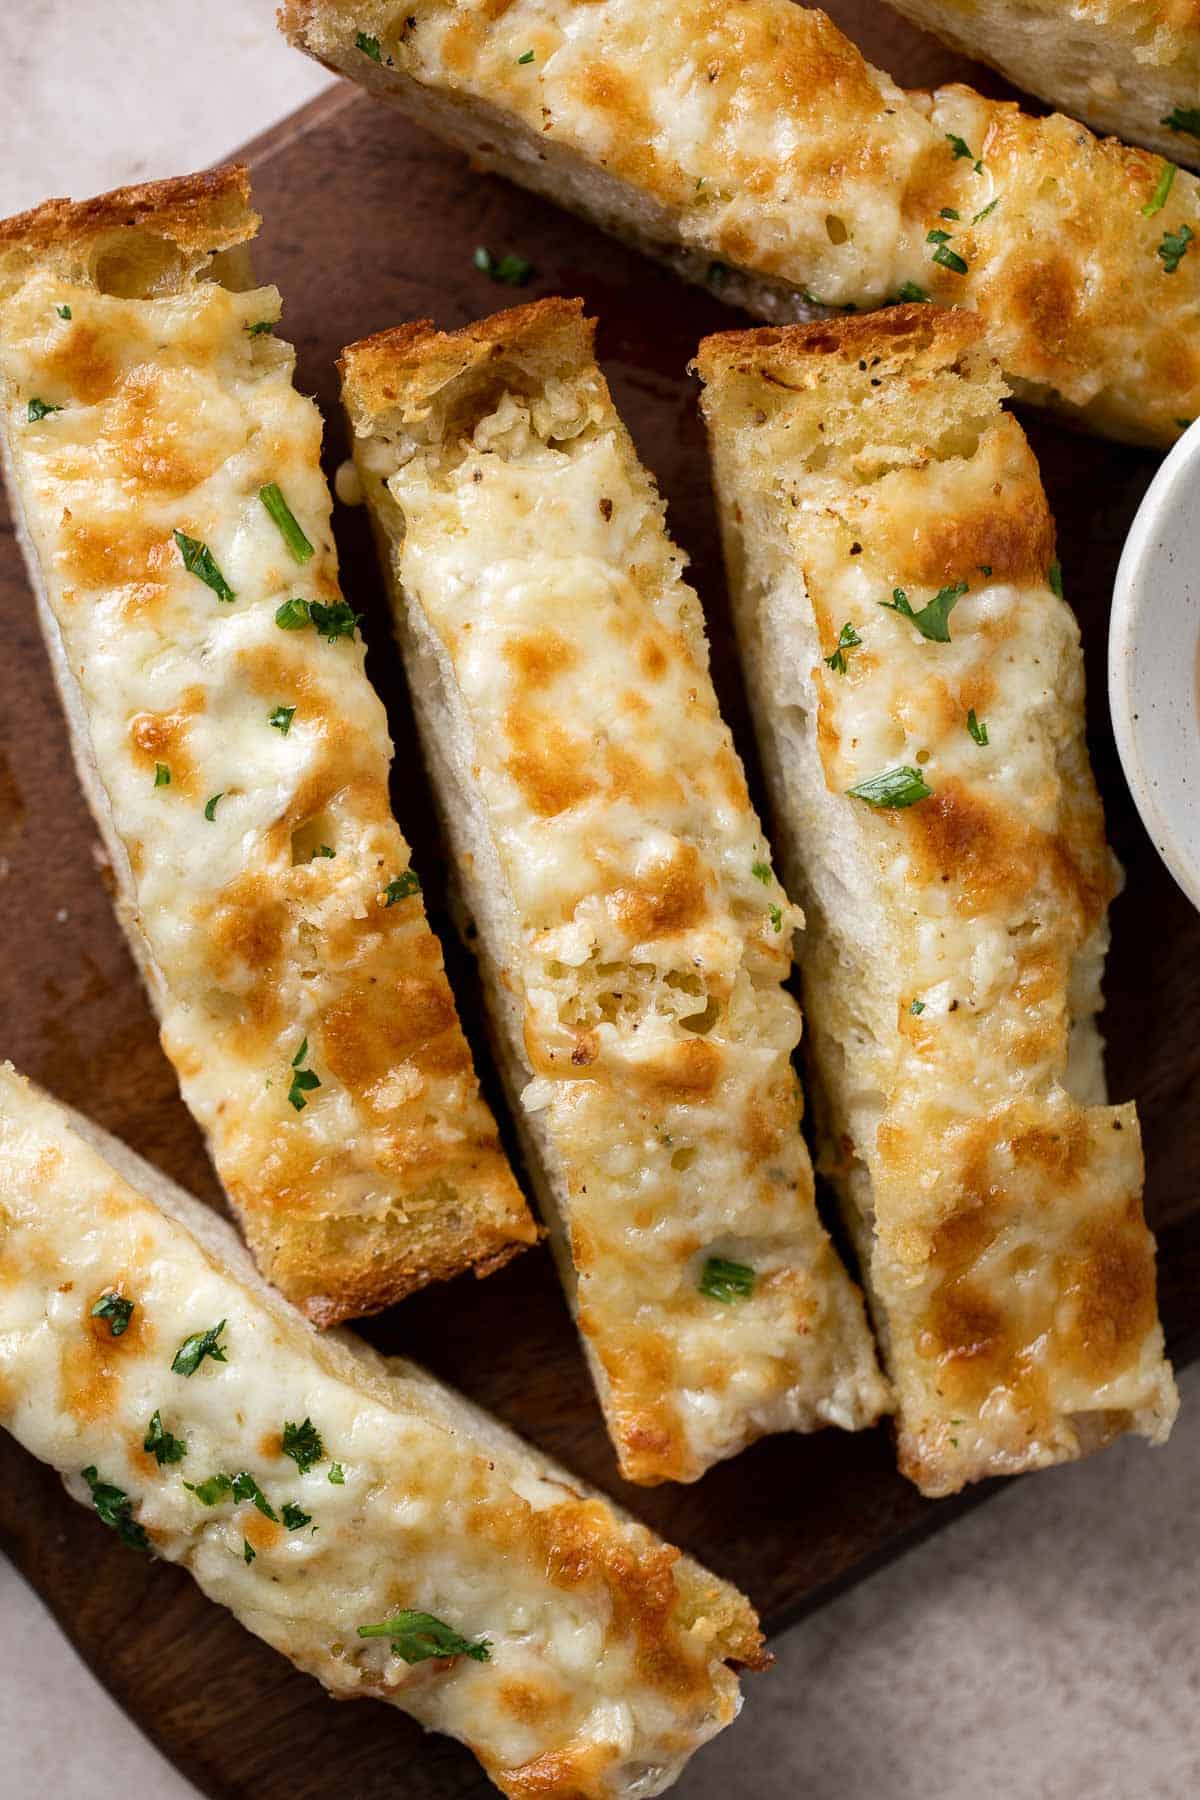 Cheesy Garlic Bread is toasty and crispy on the outside, tender and soft inside with a garlic butter and melty cheese on top. Make in under 20 minutes! | aheadofthyme.com